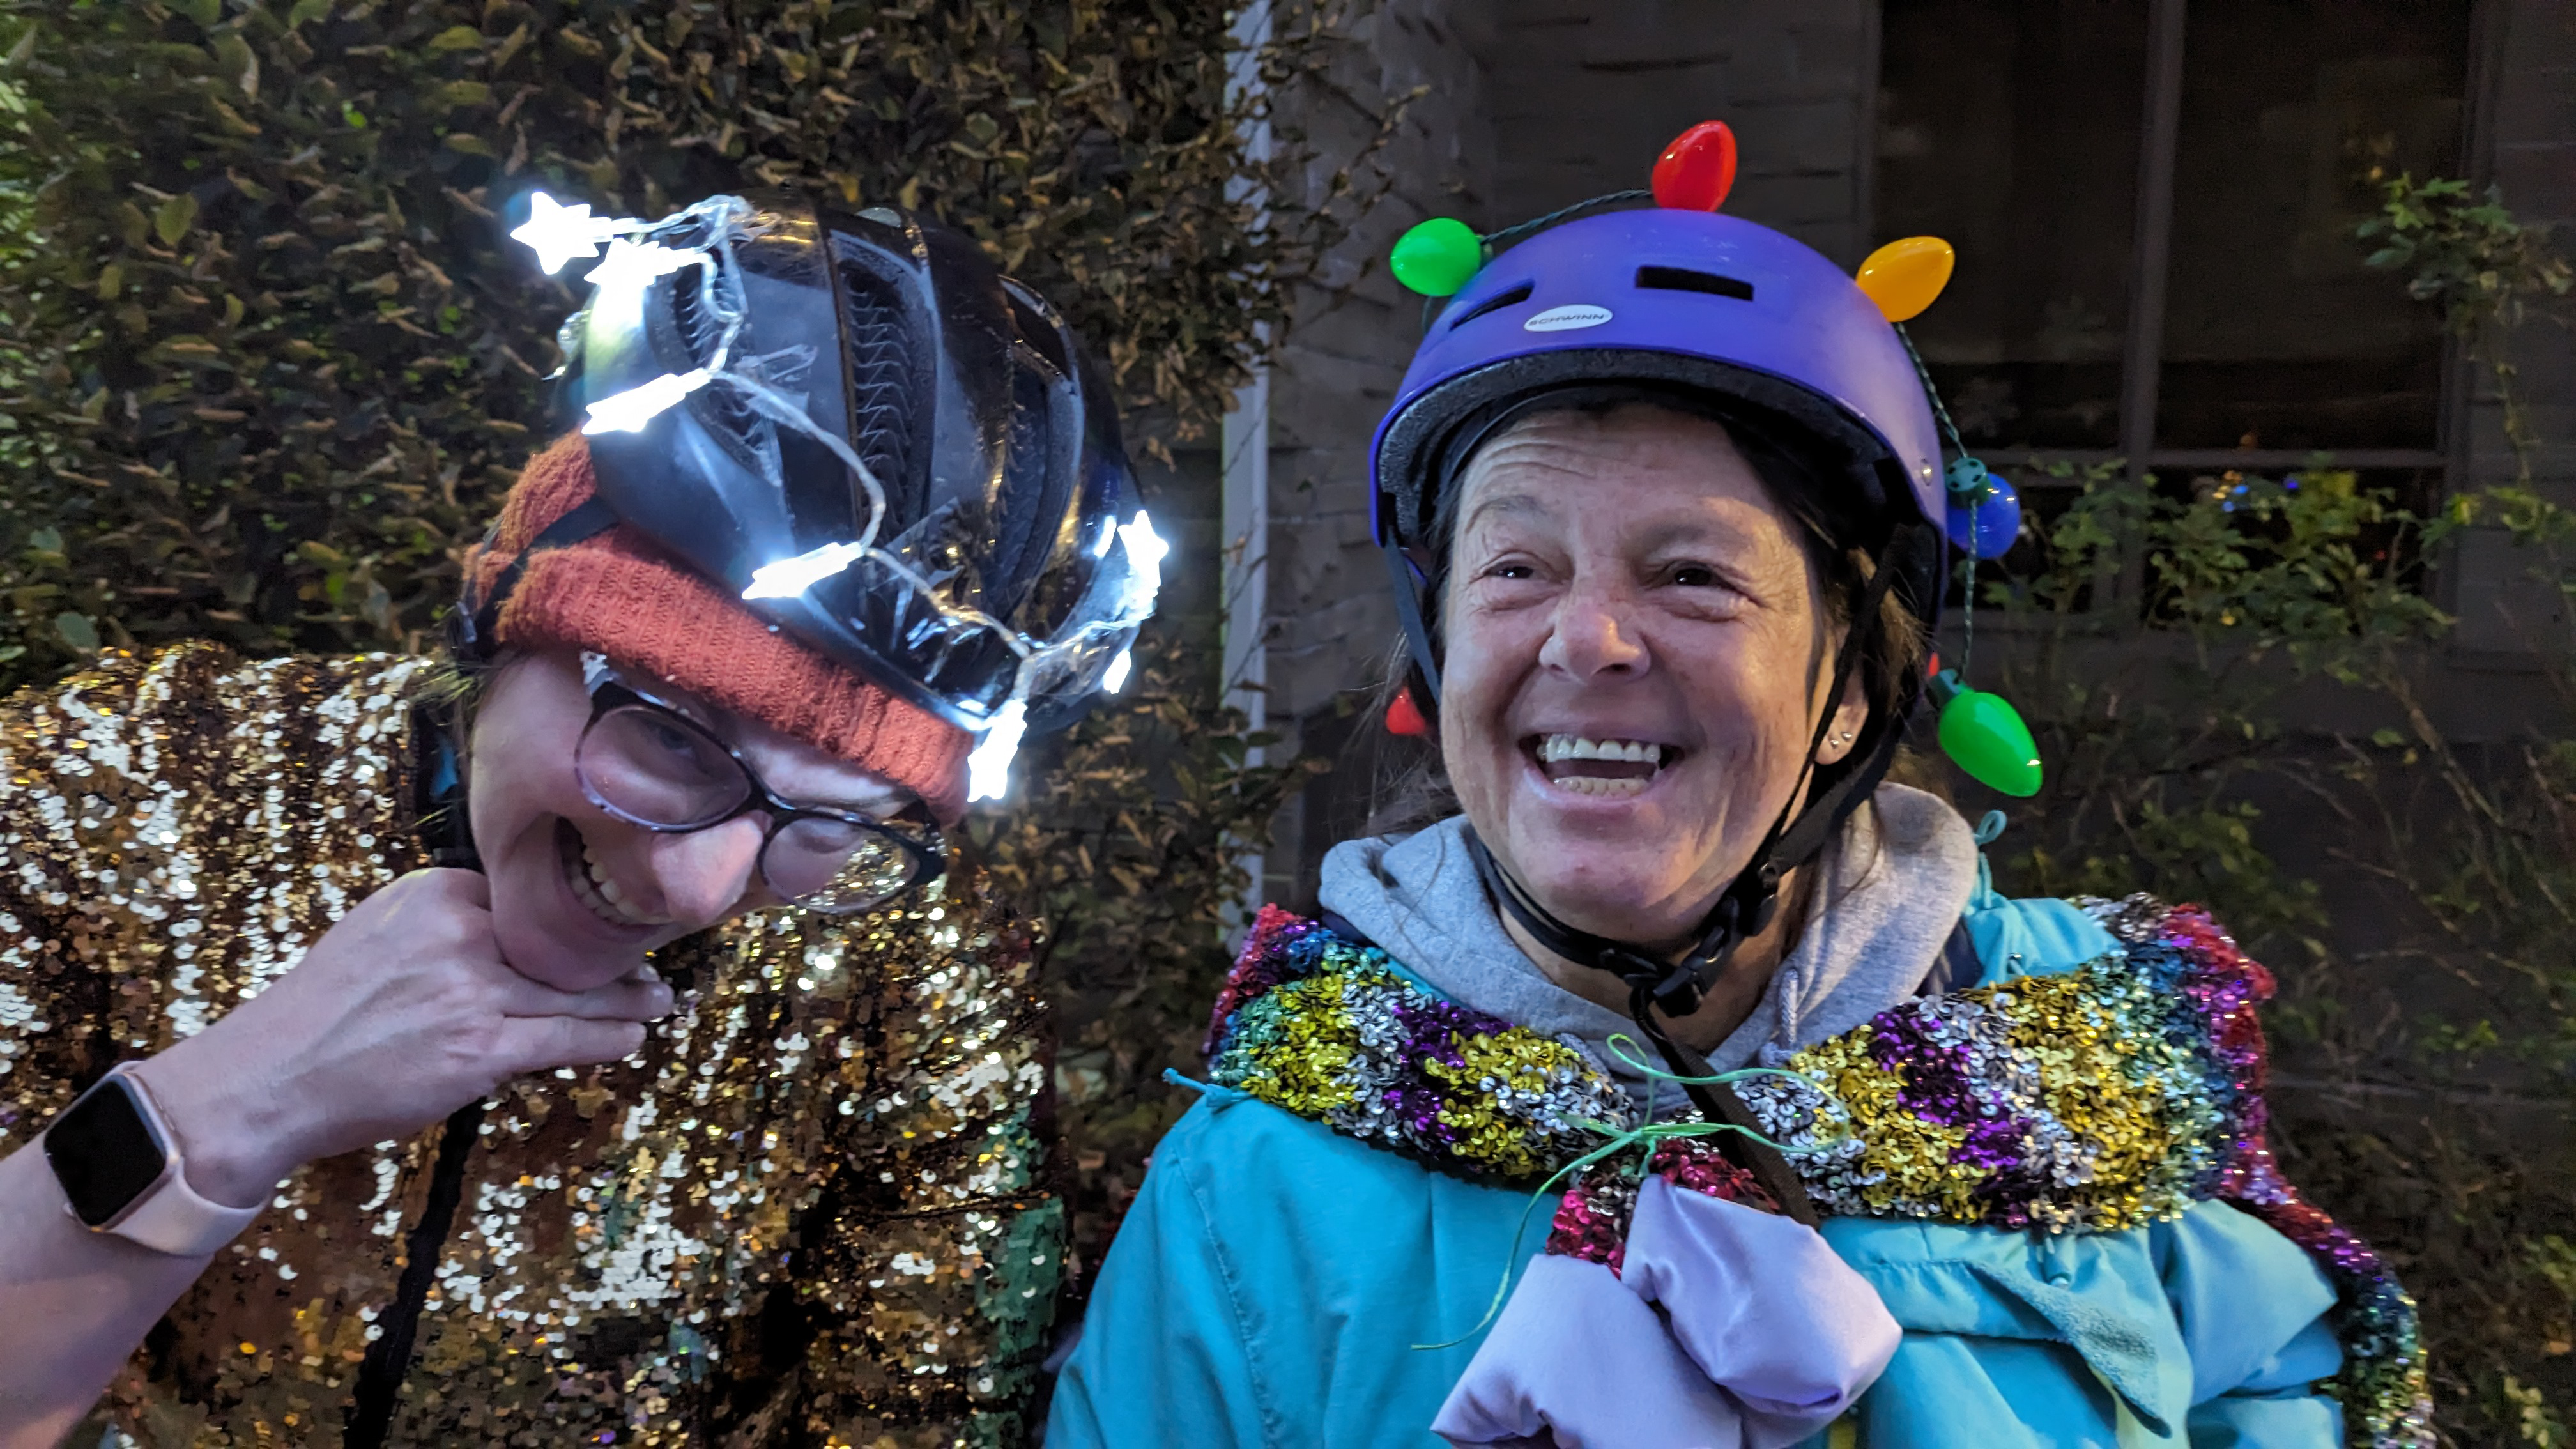 Shoulder shot of two smiling women dressed in bright flashy colours wearing helmets lit up with lights.